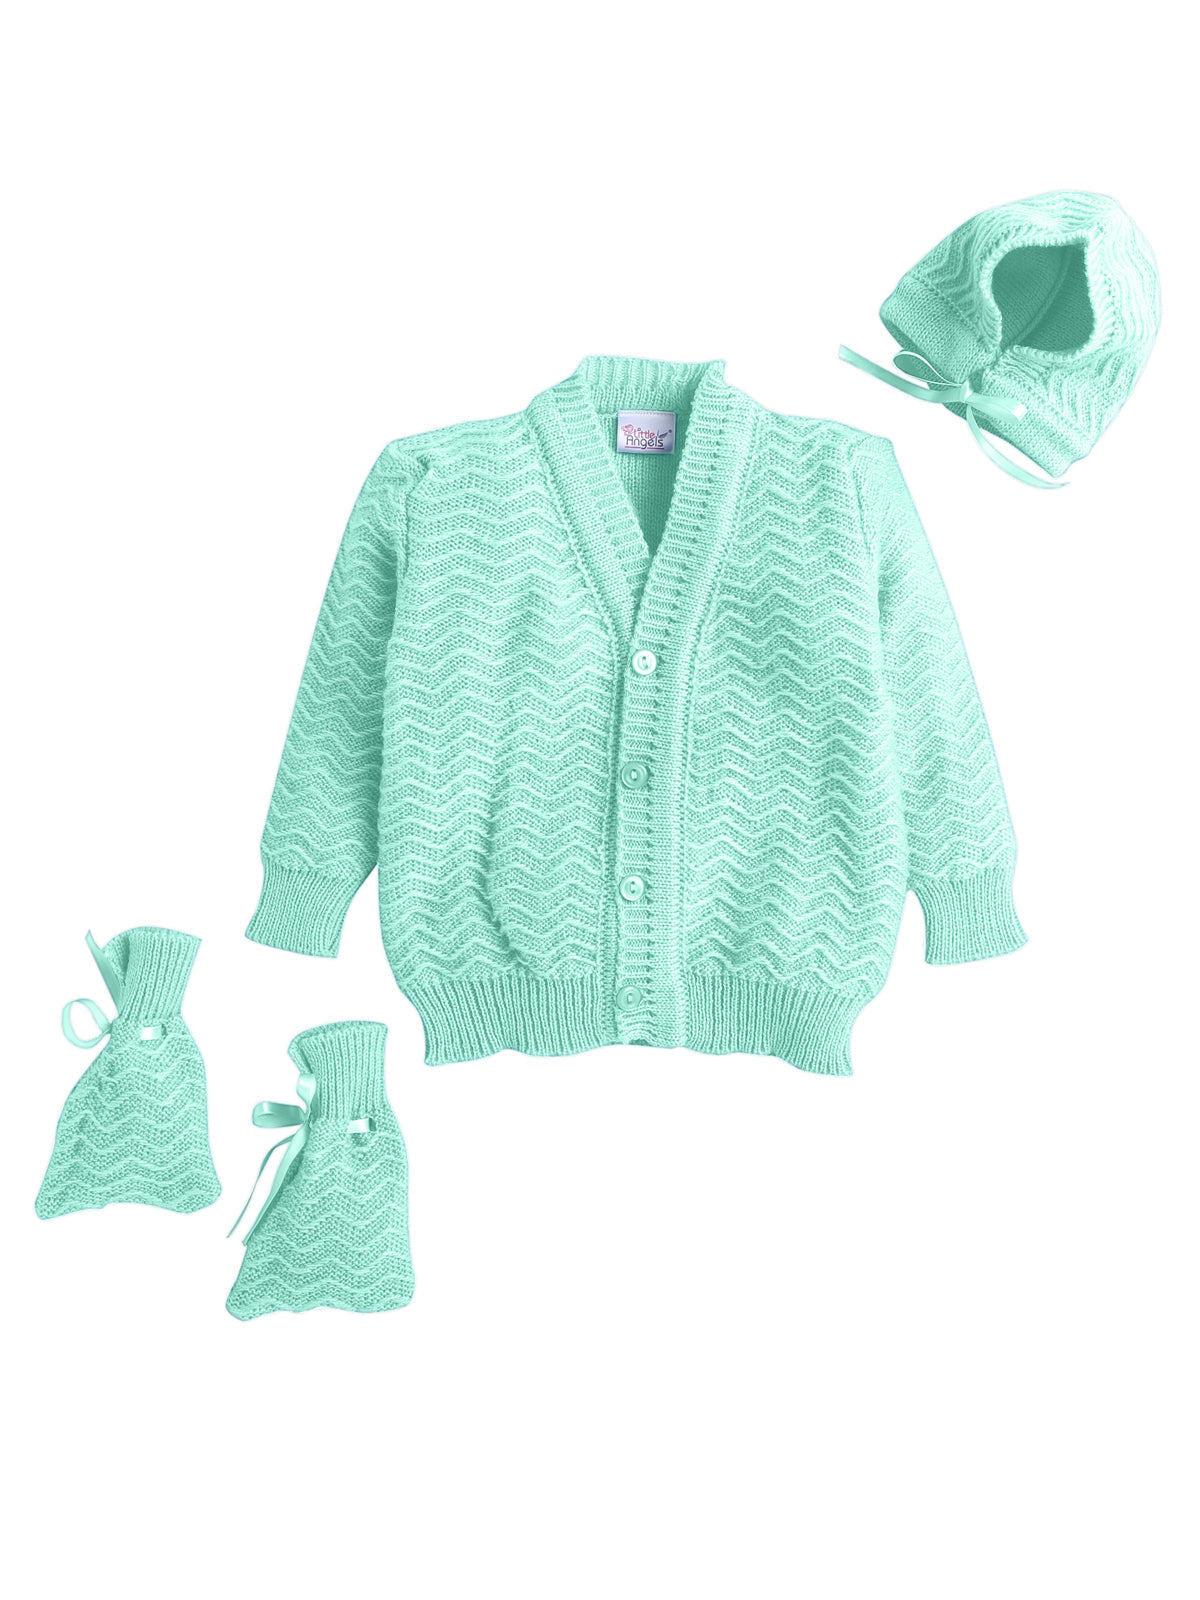 Full Sleeve Front Open Zig-zag pattern Green Color Sweater with matching Caps and Socks for Baby